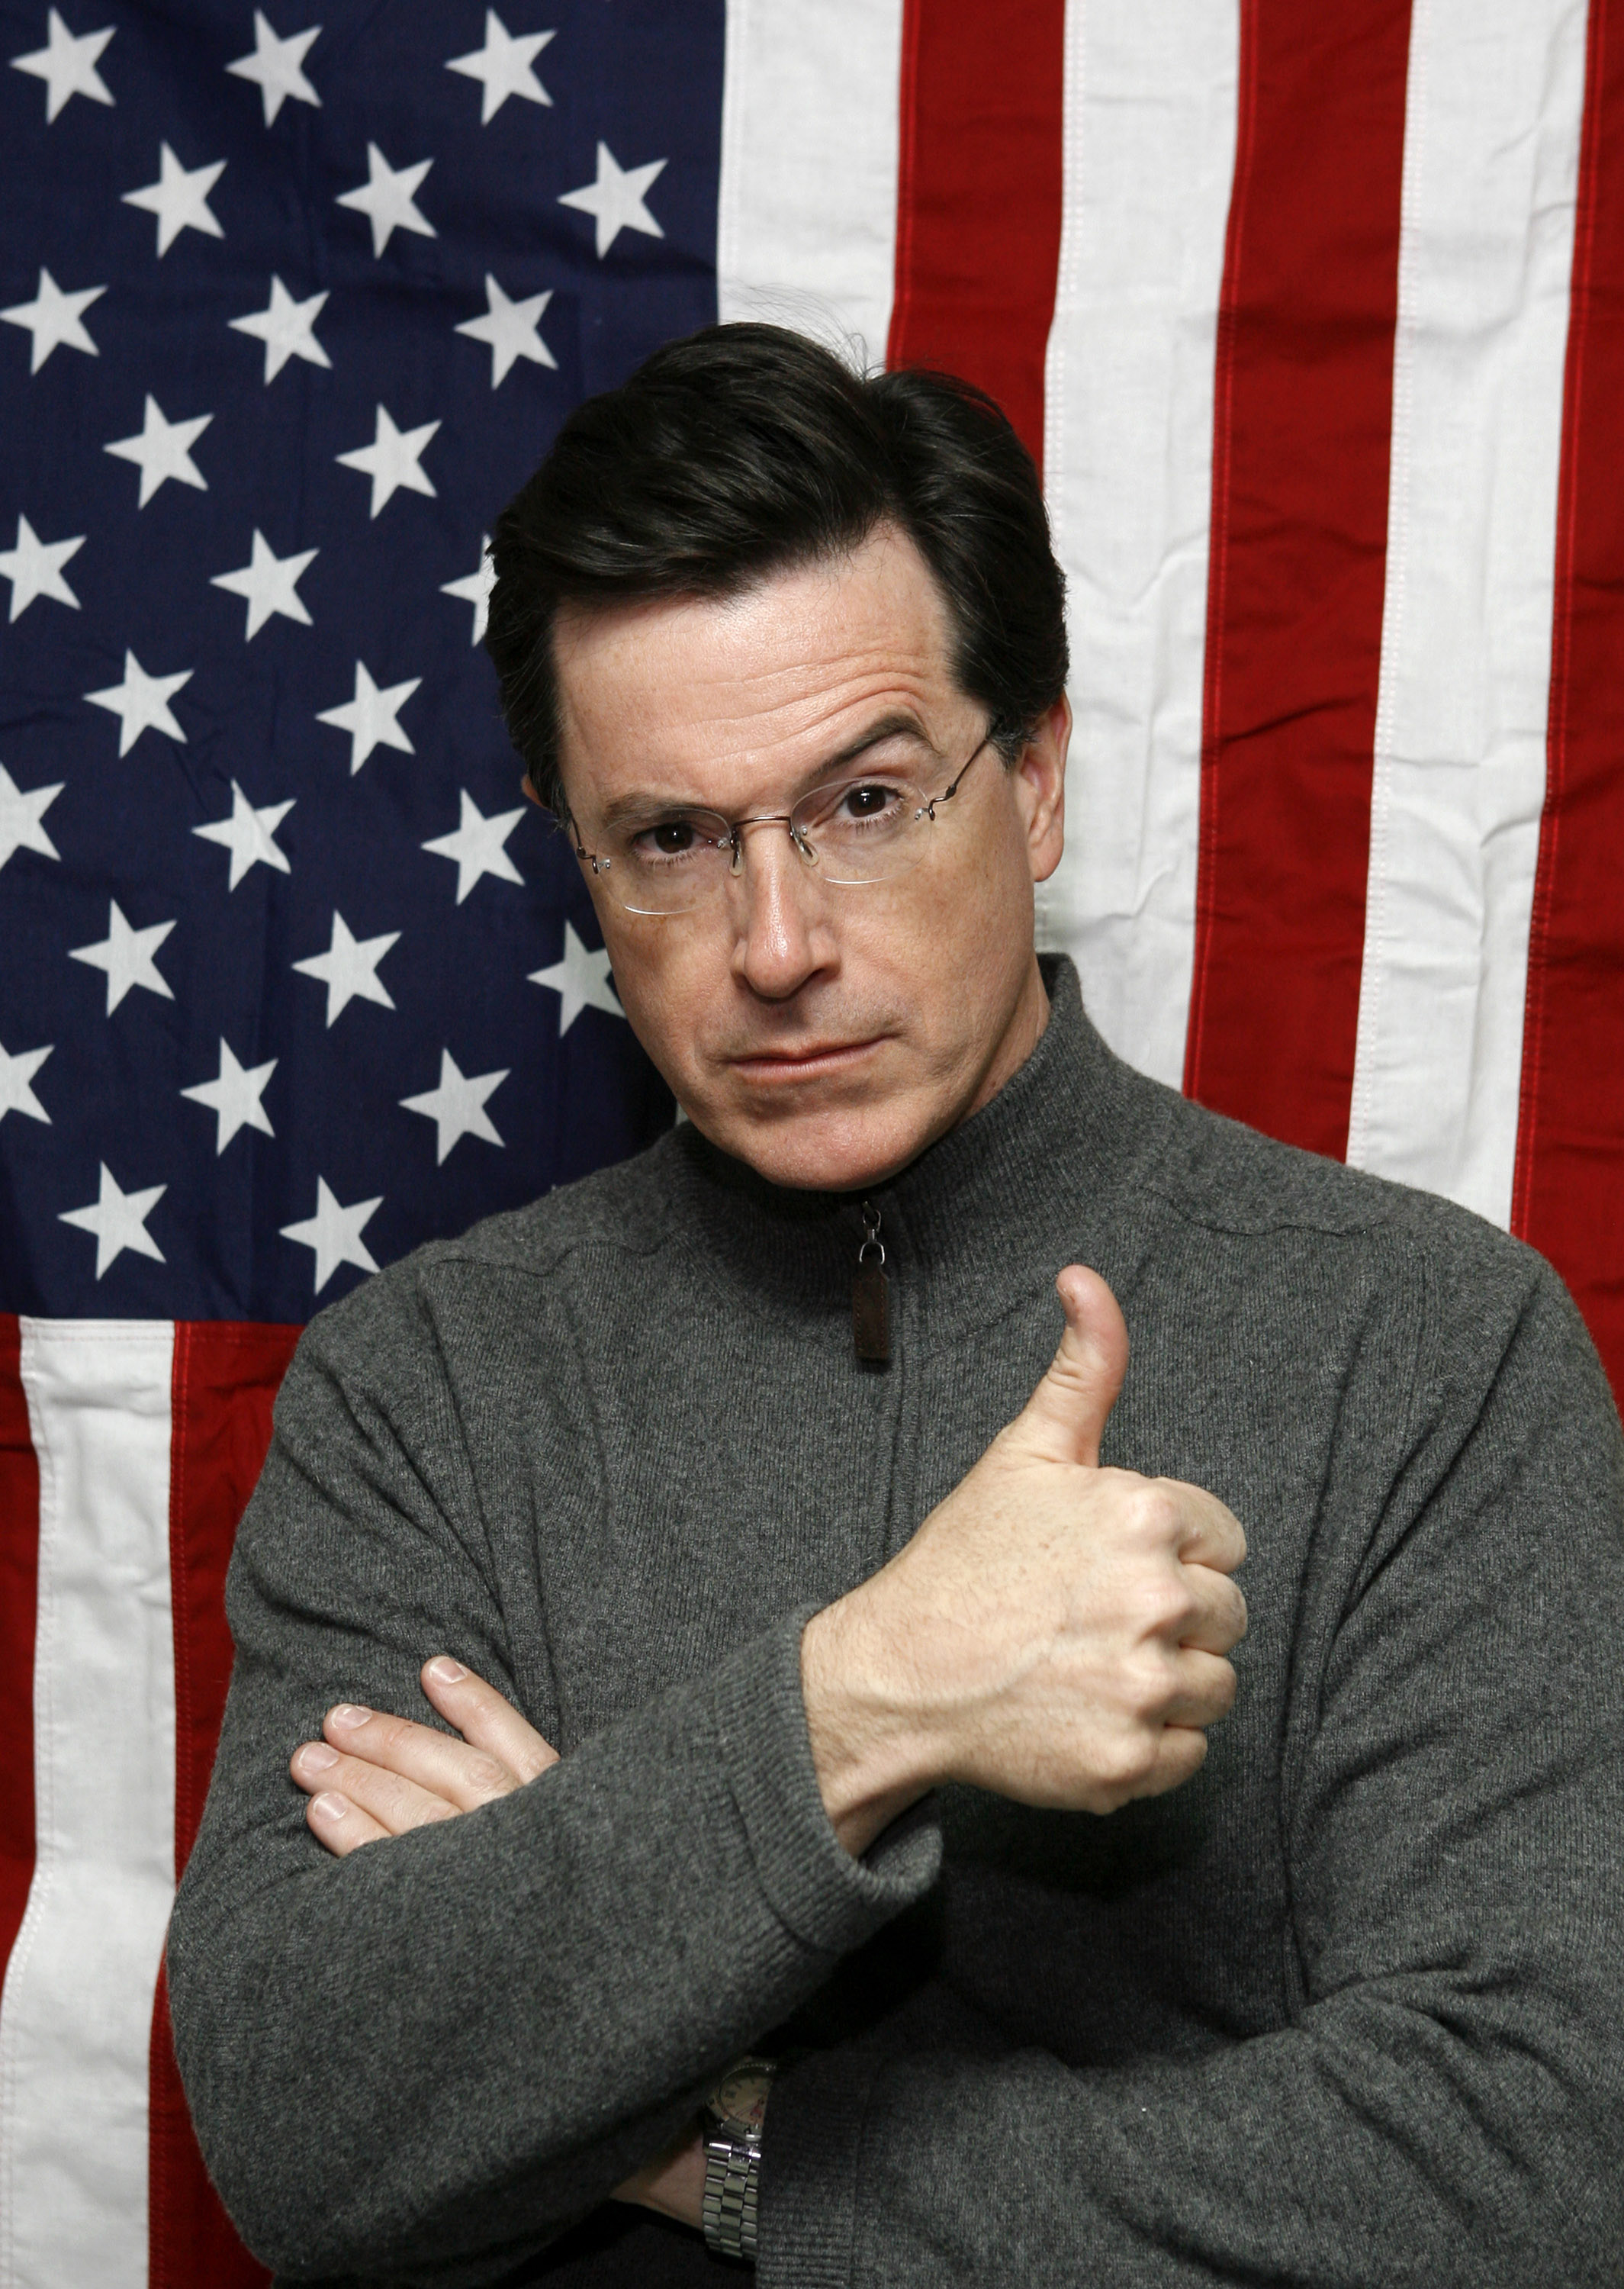 Stephen Colbert wallpaper High Resolution and Quality Download